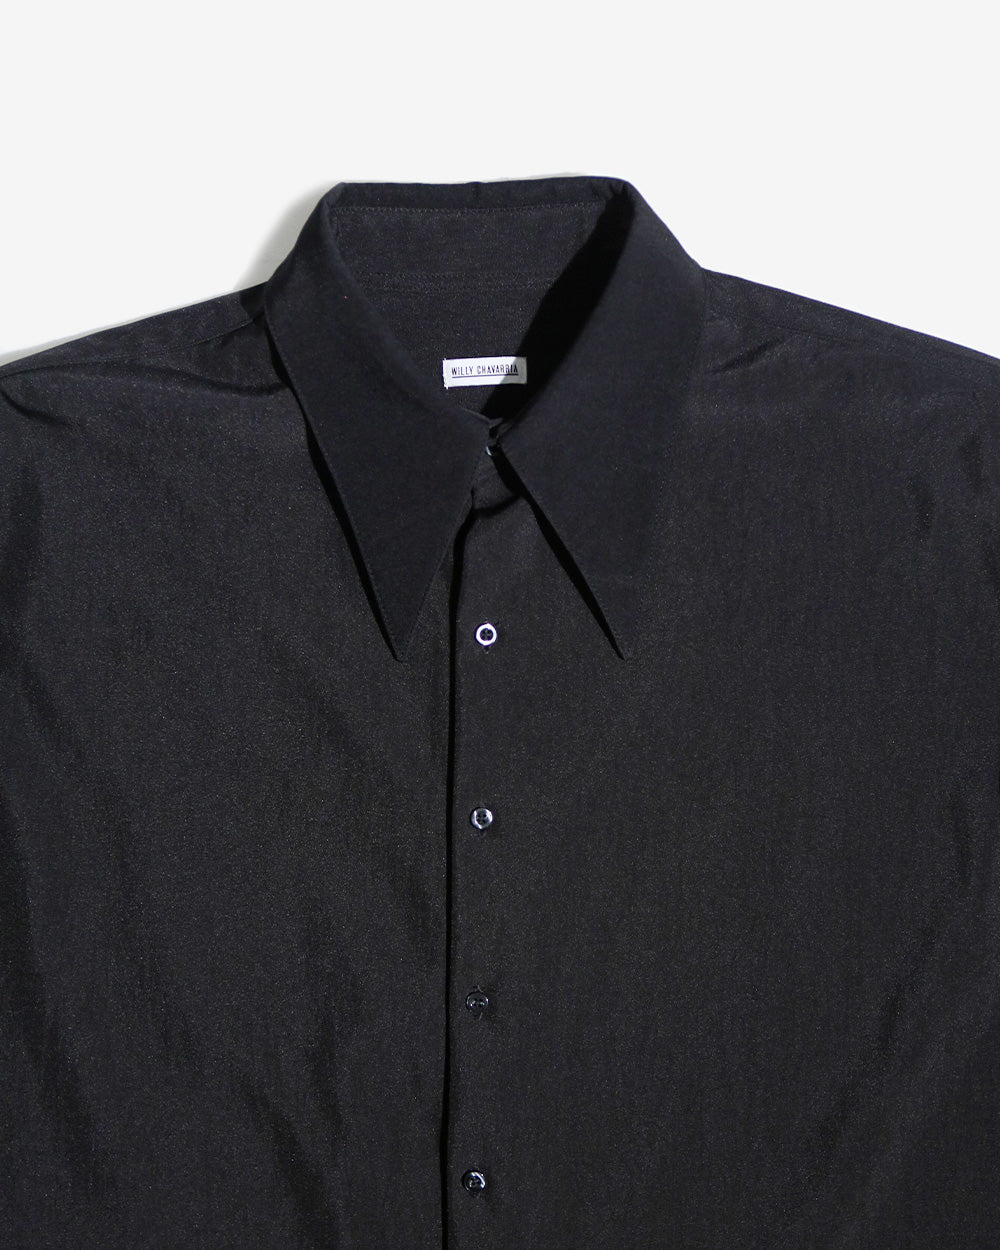 WILLY CHAVARRIA / Point Collar Shirt Black - Road Sign